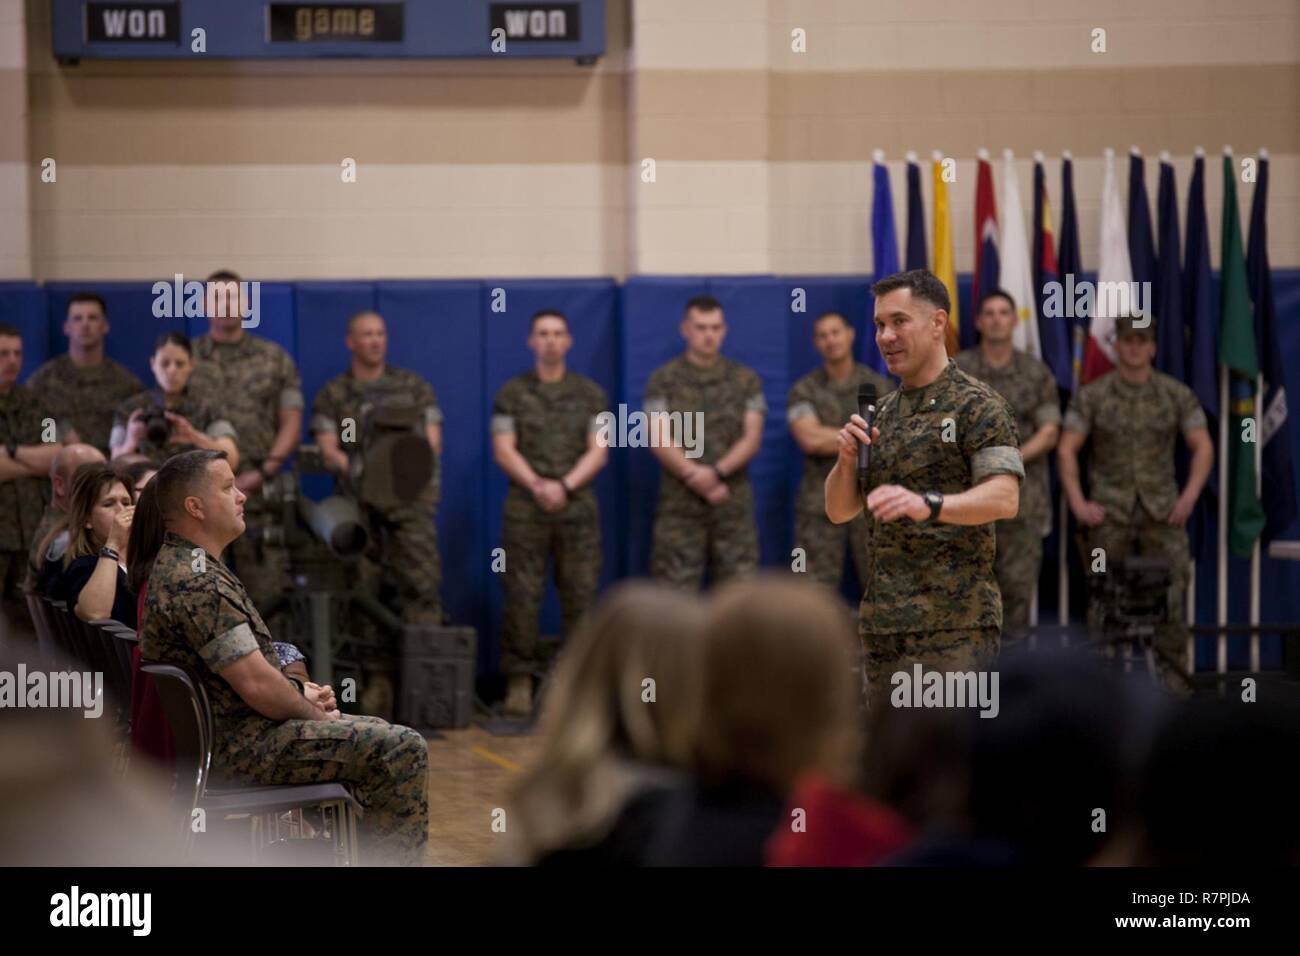 U.S. Marine Corps Lt. Col. Brett T. McGinley, commanding officer of Infantry Training Battalion, School of Infantry-East, addresses guests during the Bravo Company graduation aboard Camp Geiger, N.C., March 23, 2017. Lt. Col. McGinley spoke to the friends and families of the Marines who graduated that day. Stock Photo